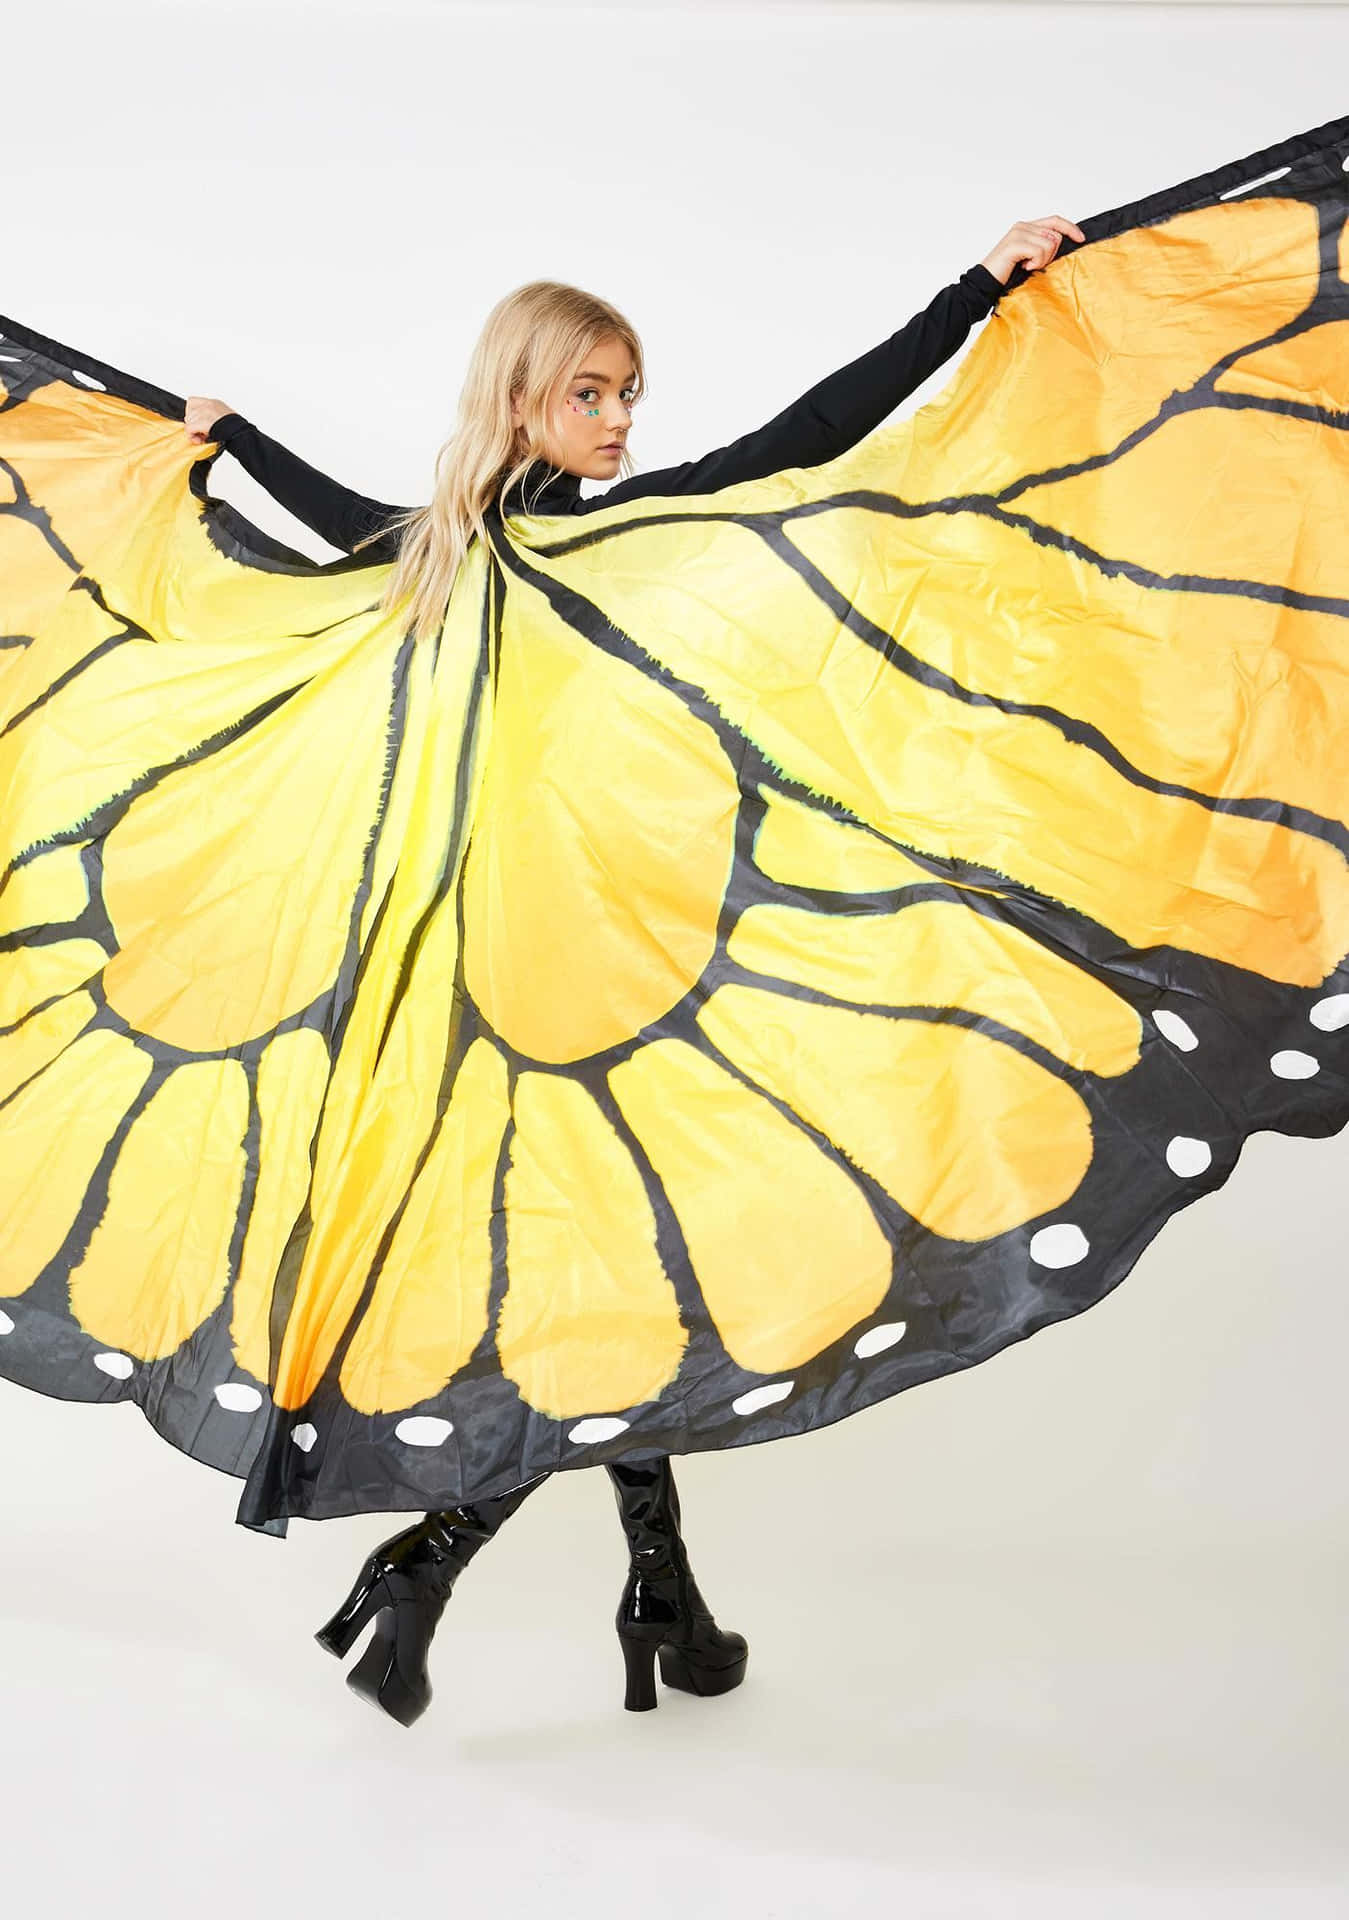 A Butterfly Wing Dress for a Storybook Celebration Wallpaper